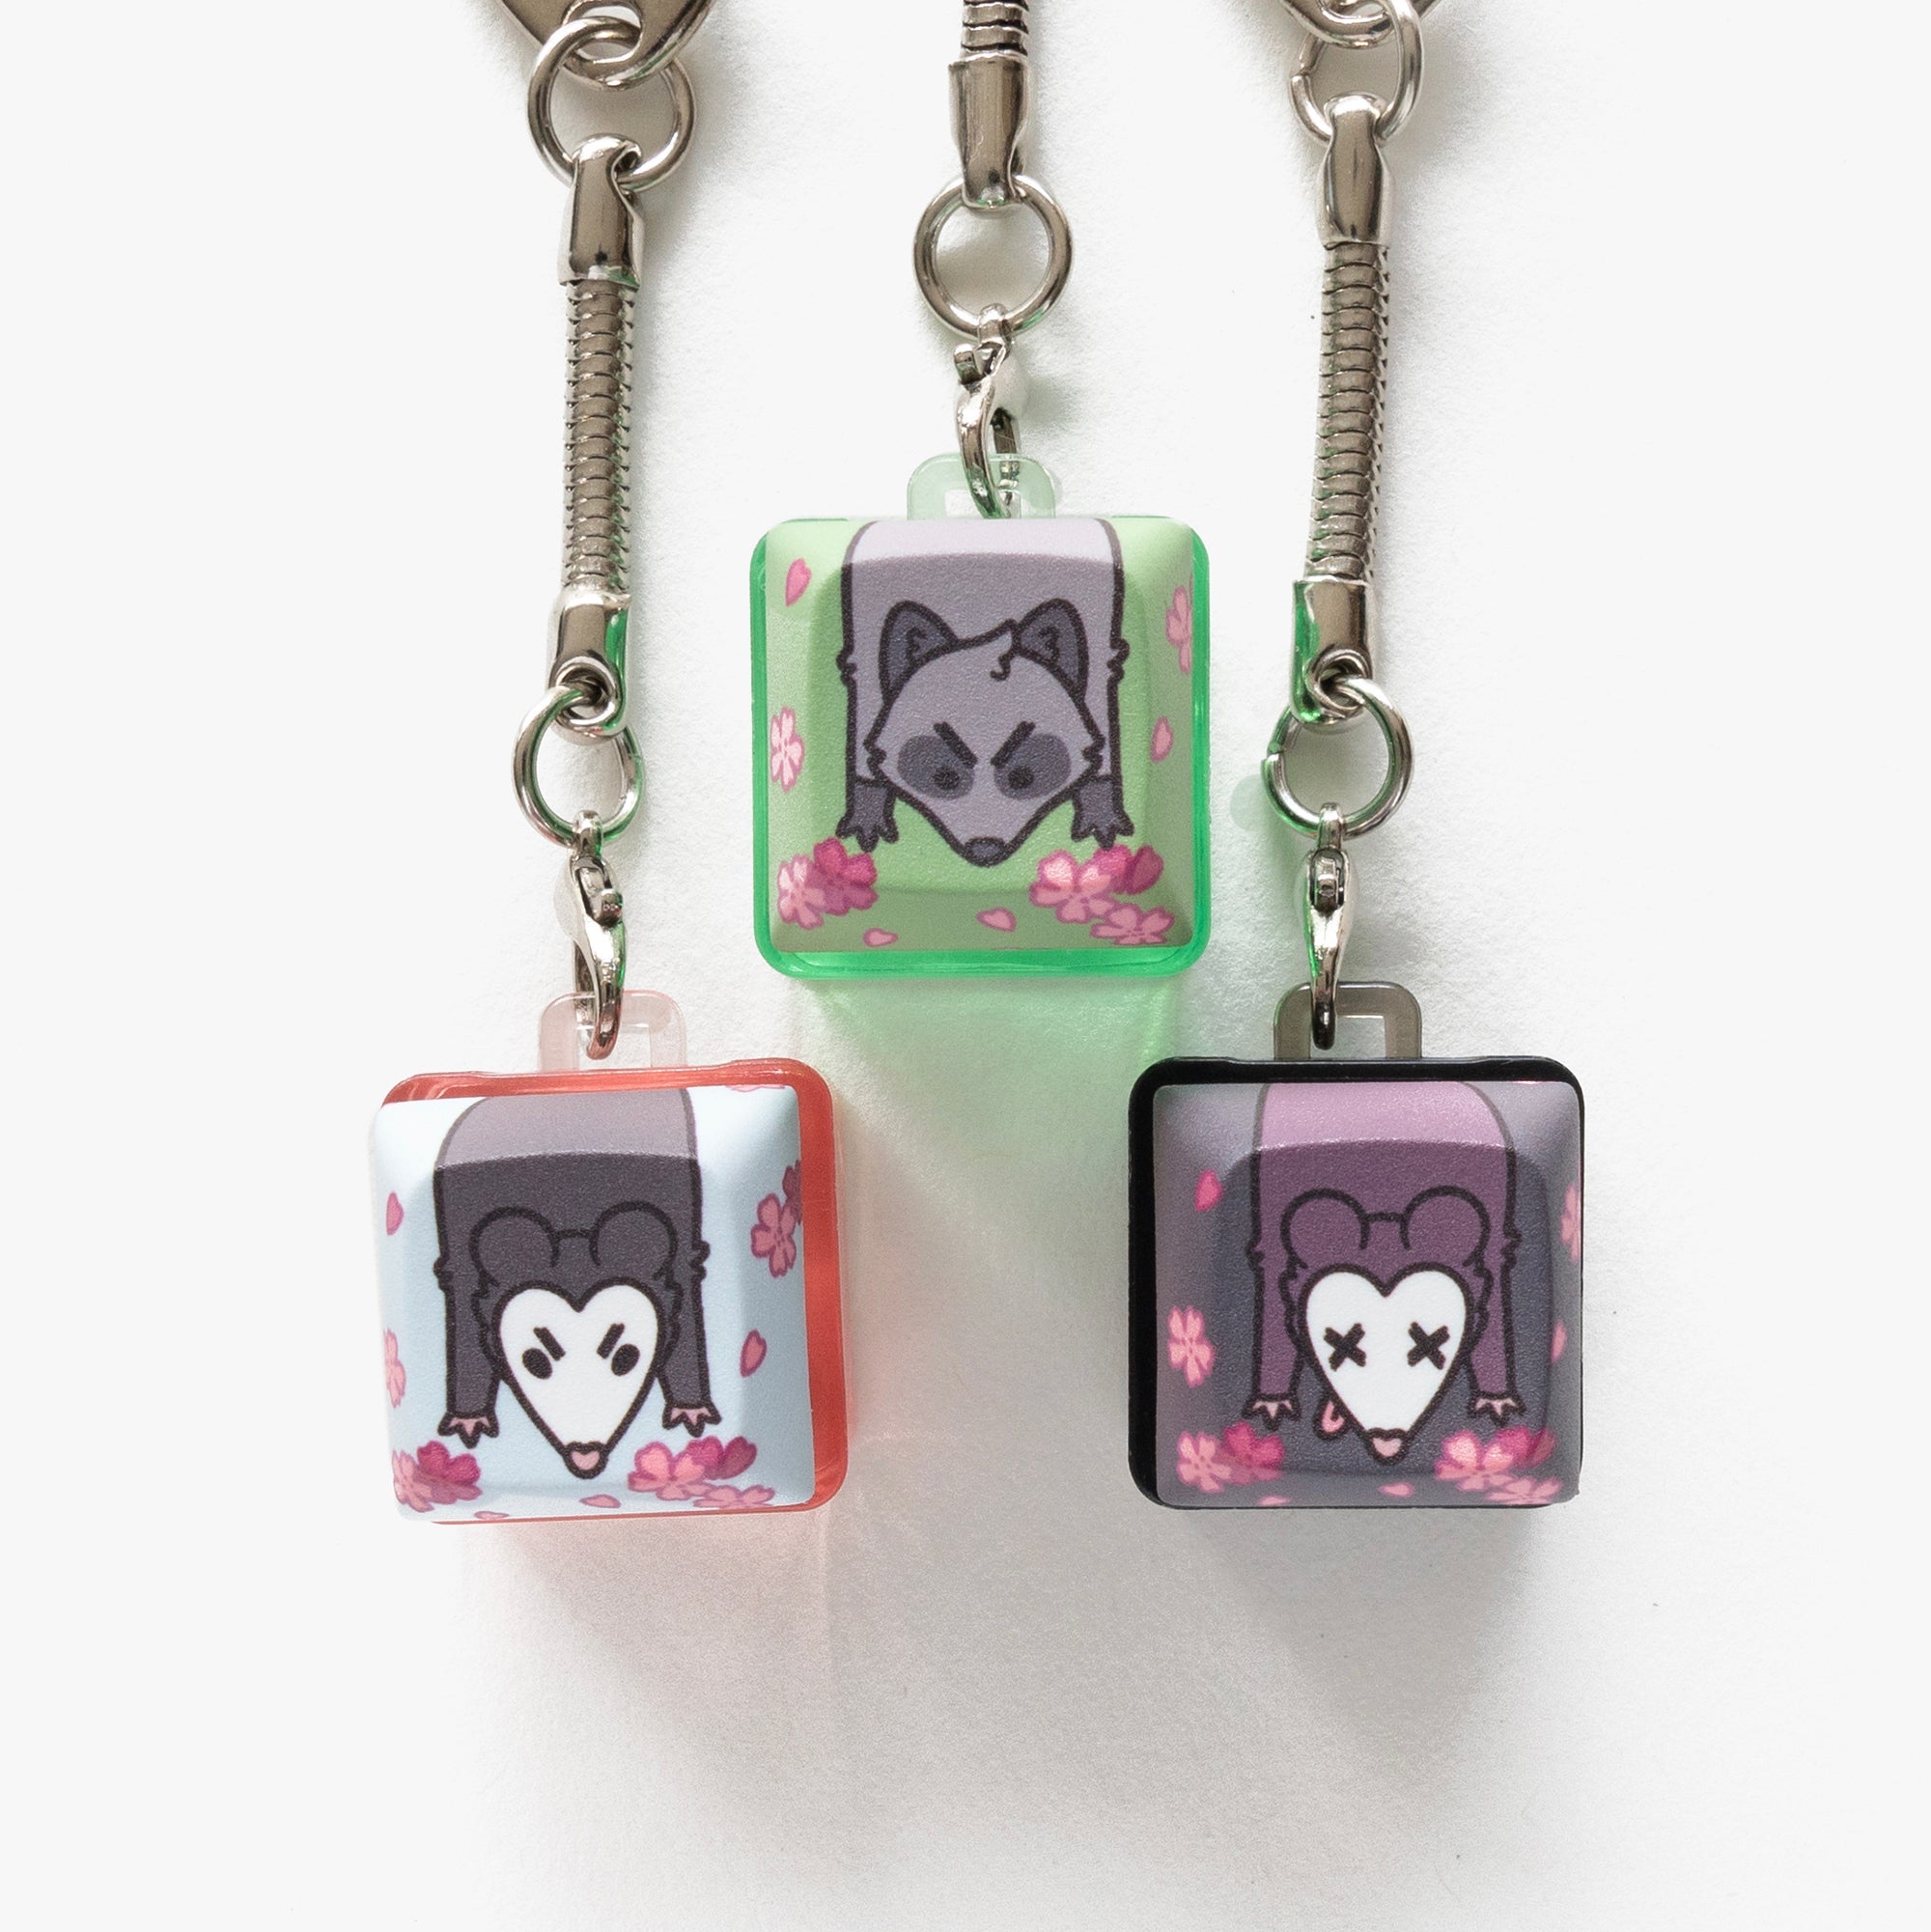 Clicky Keychains Series 2